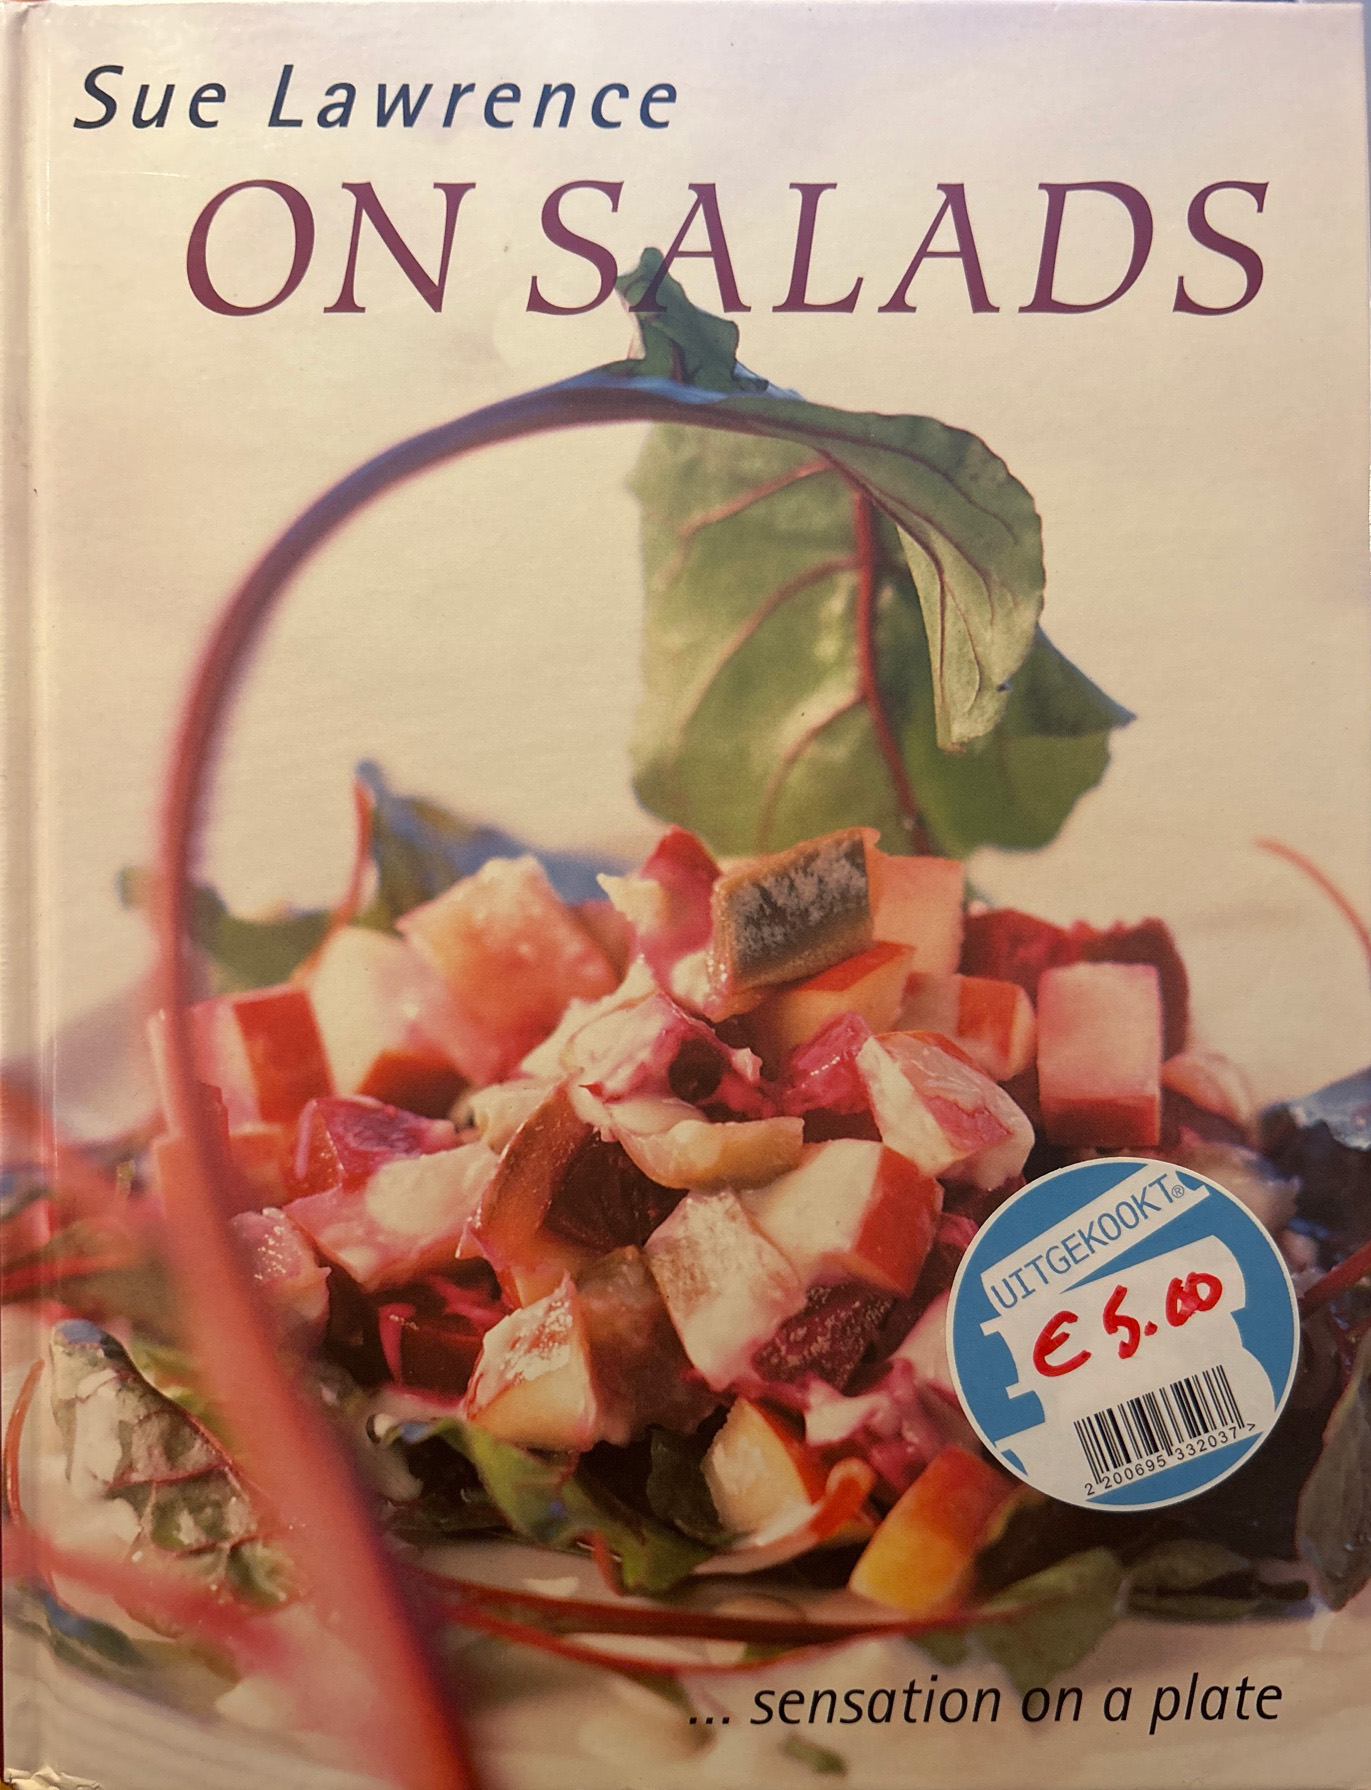 On Salads – Sue Lawrence